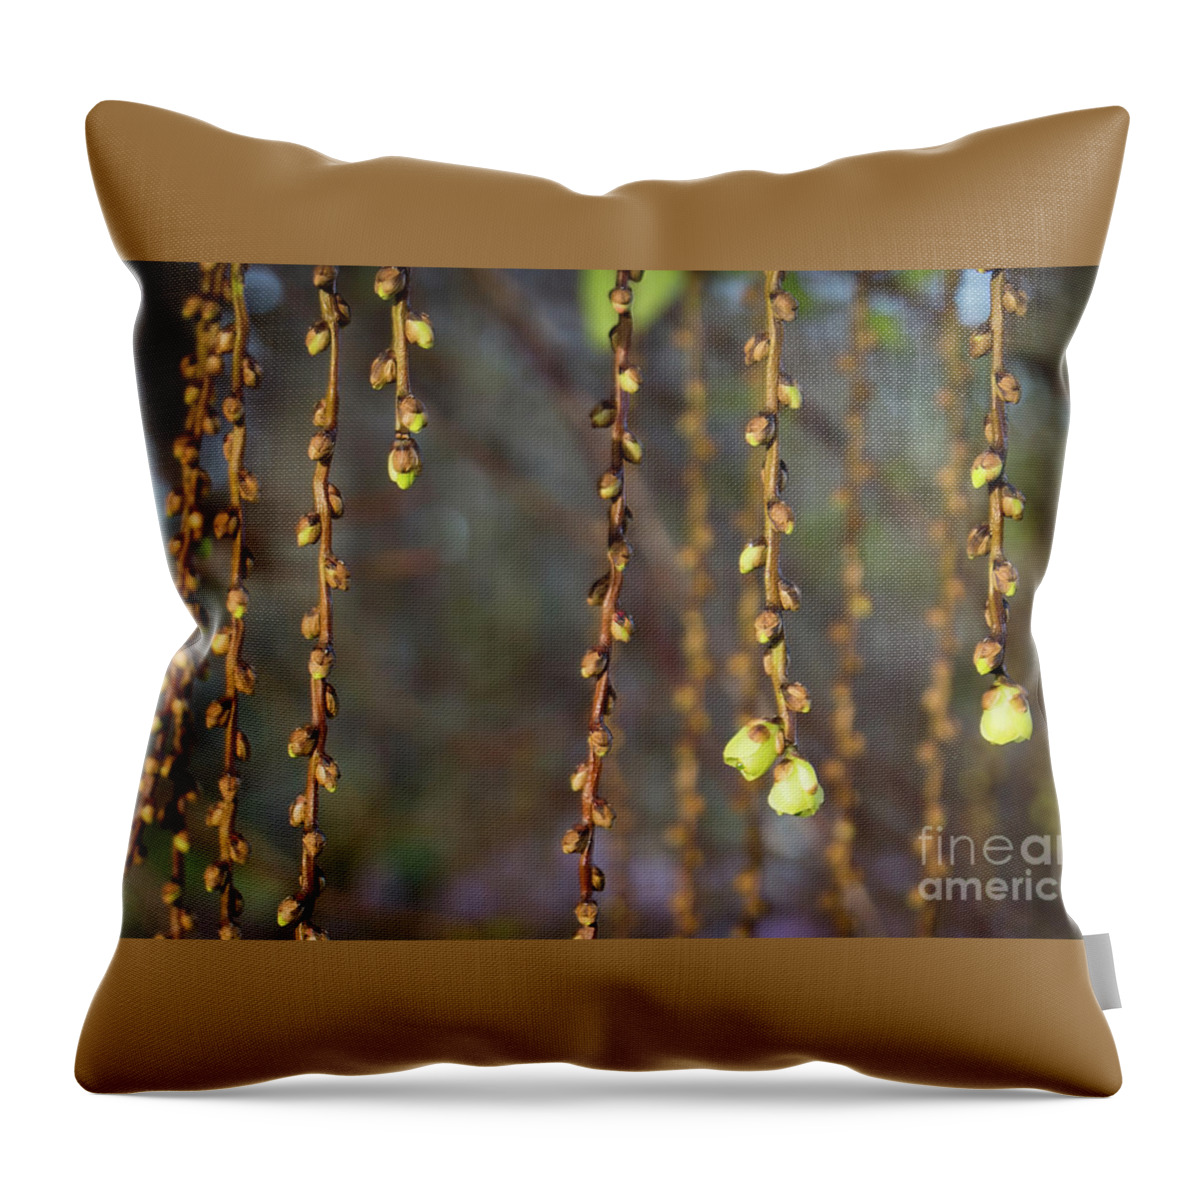 Willow Throw Pillow featuring the photograph Spring Buds by Kathy Strauss